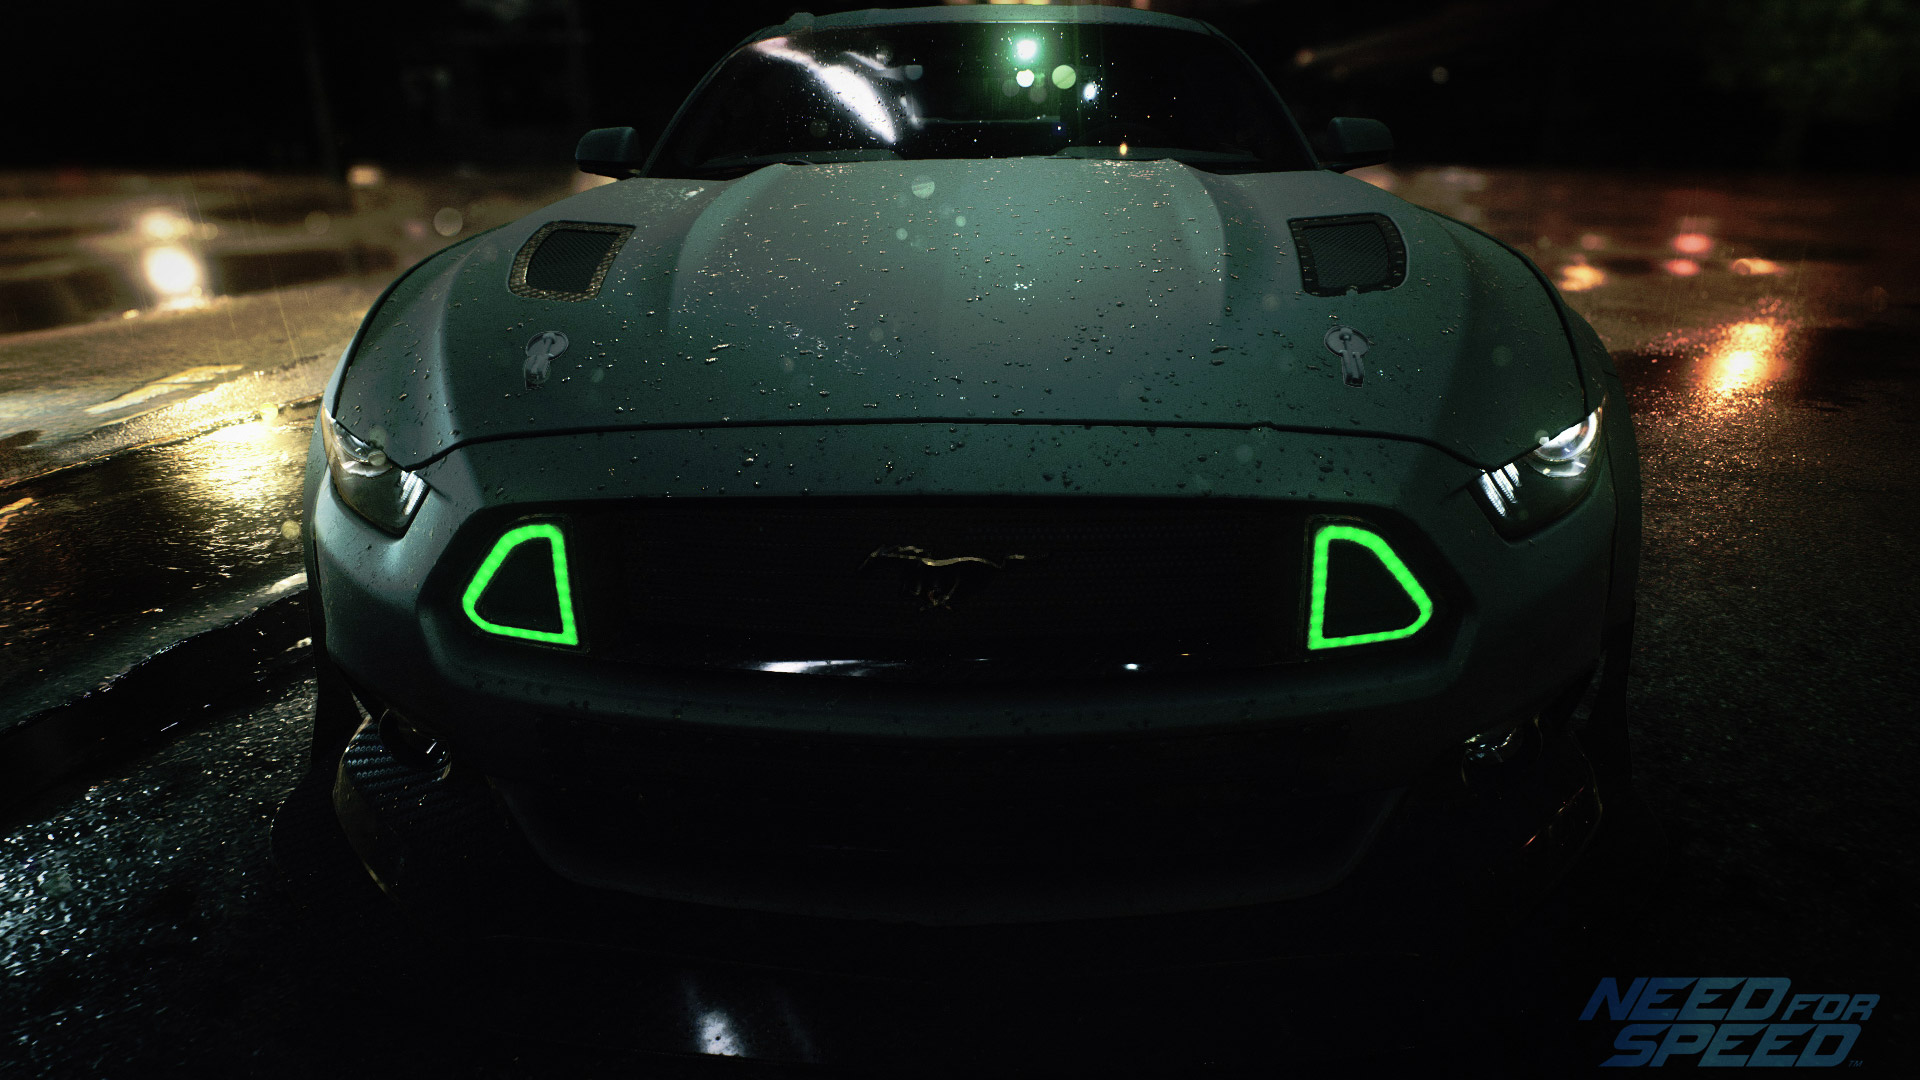 High Resolution Need For Speed Wallpaper Ign India